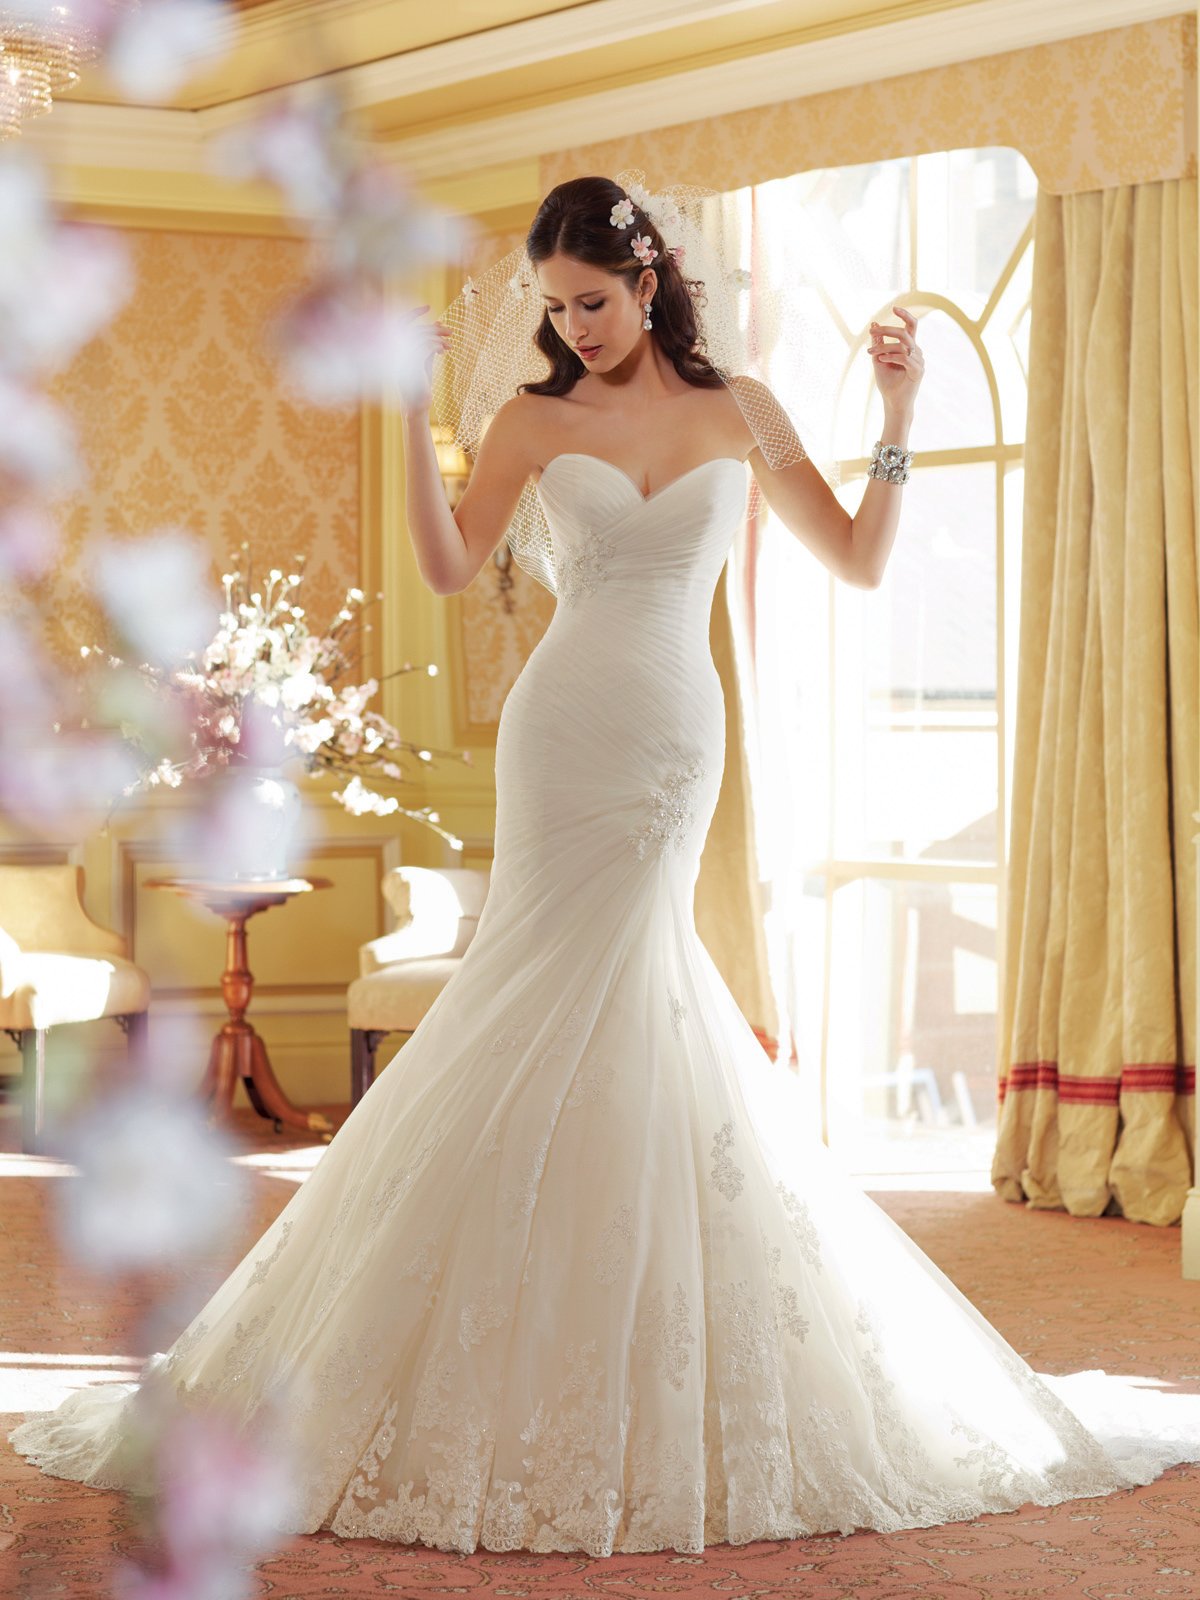 Sophia Tolli 2014 Bridal Collection - World inside pictures